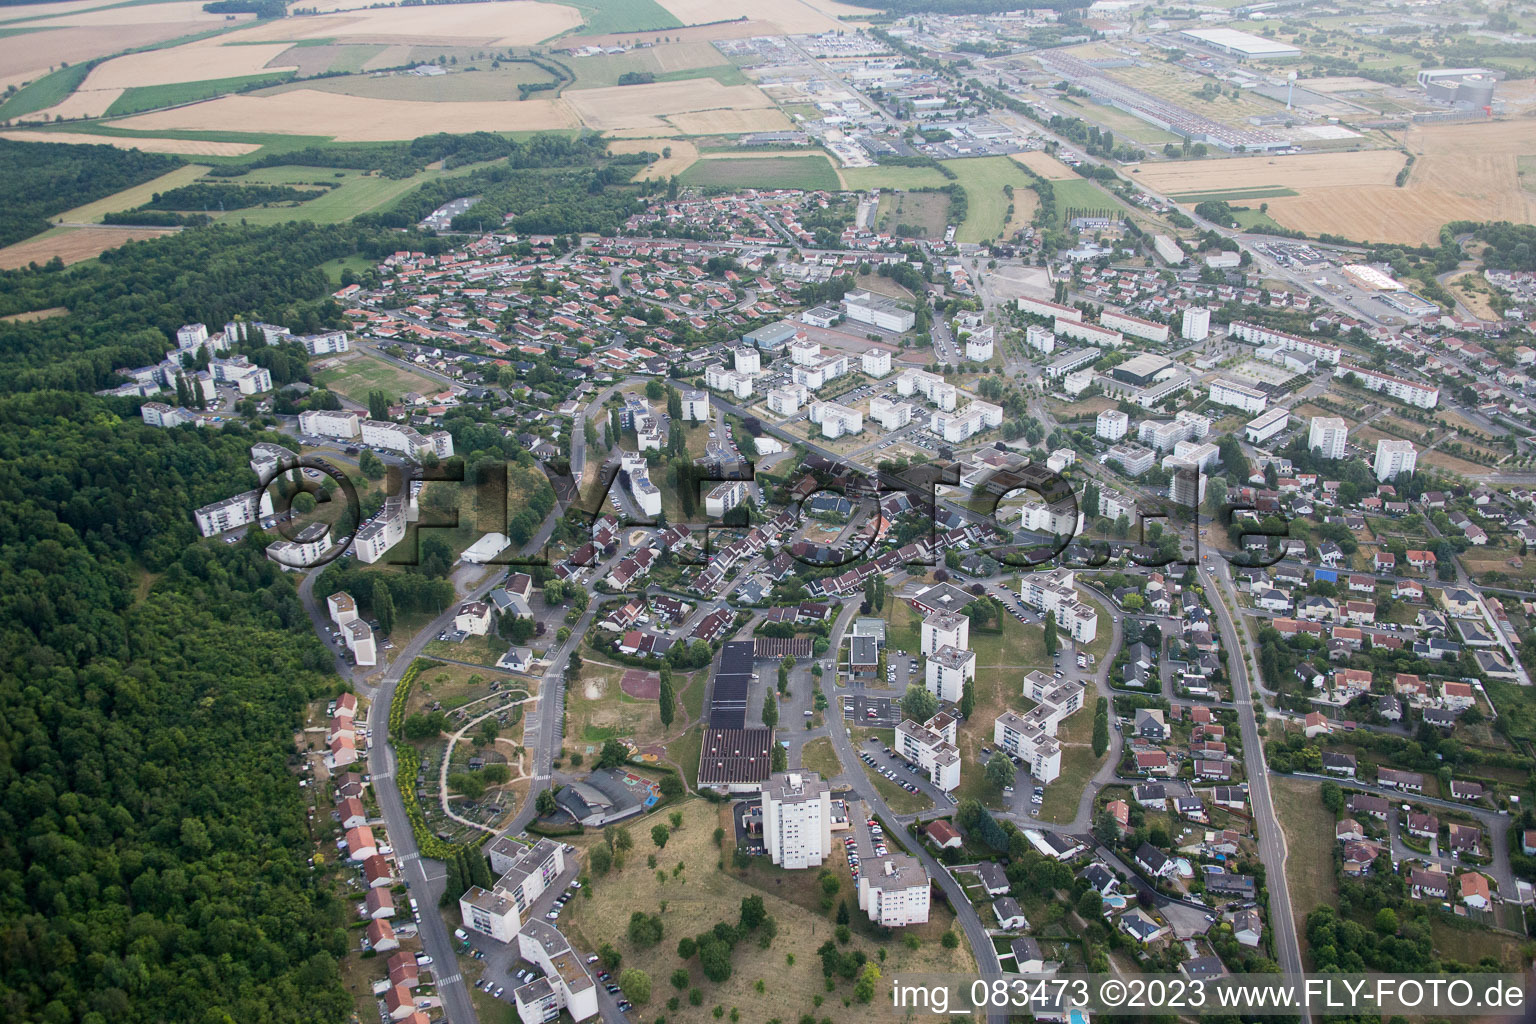 Aerial photograpy of Toul in the state Meurthe et Moselle, France